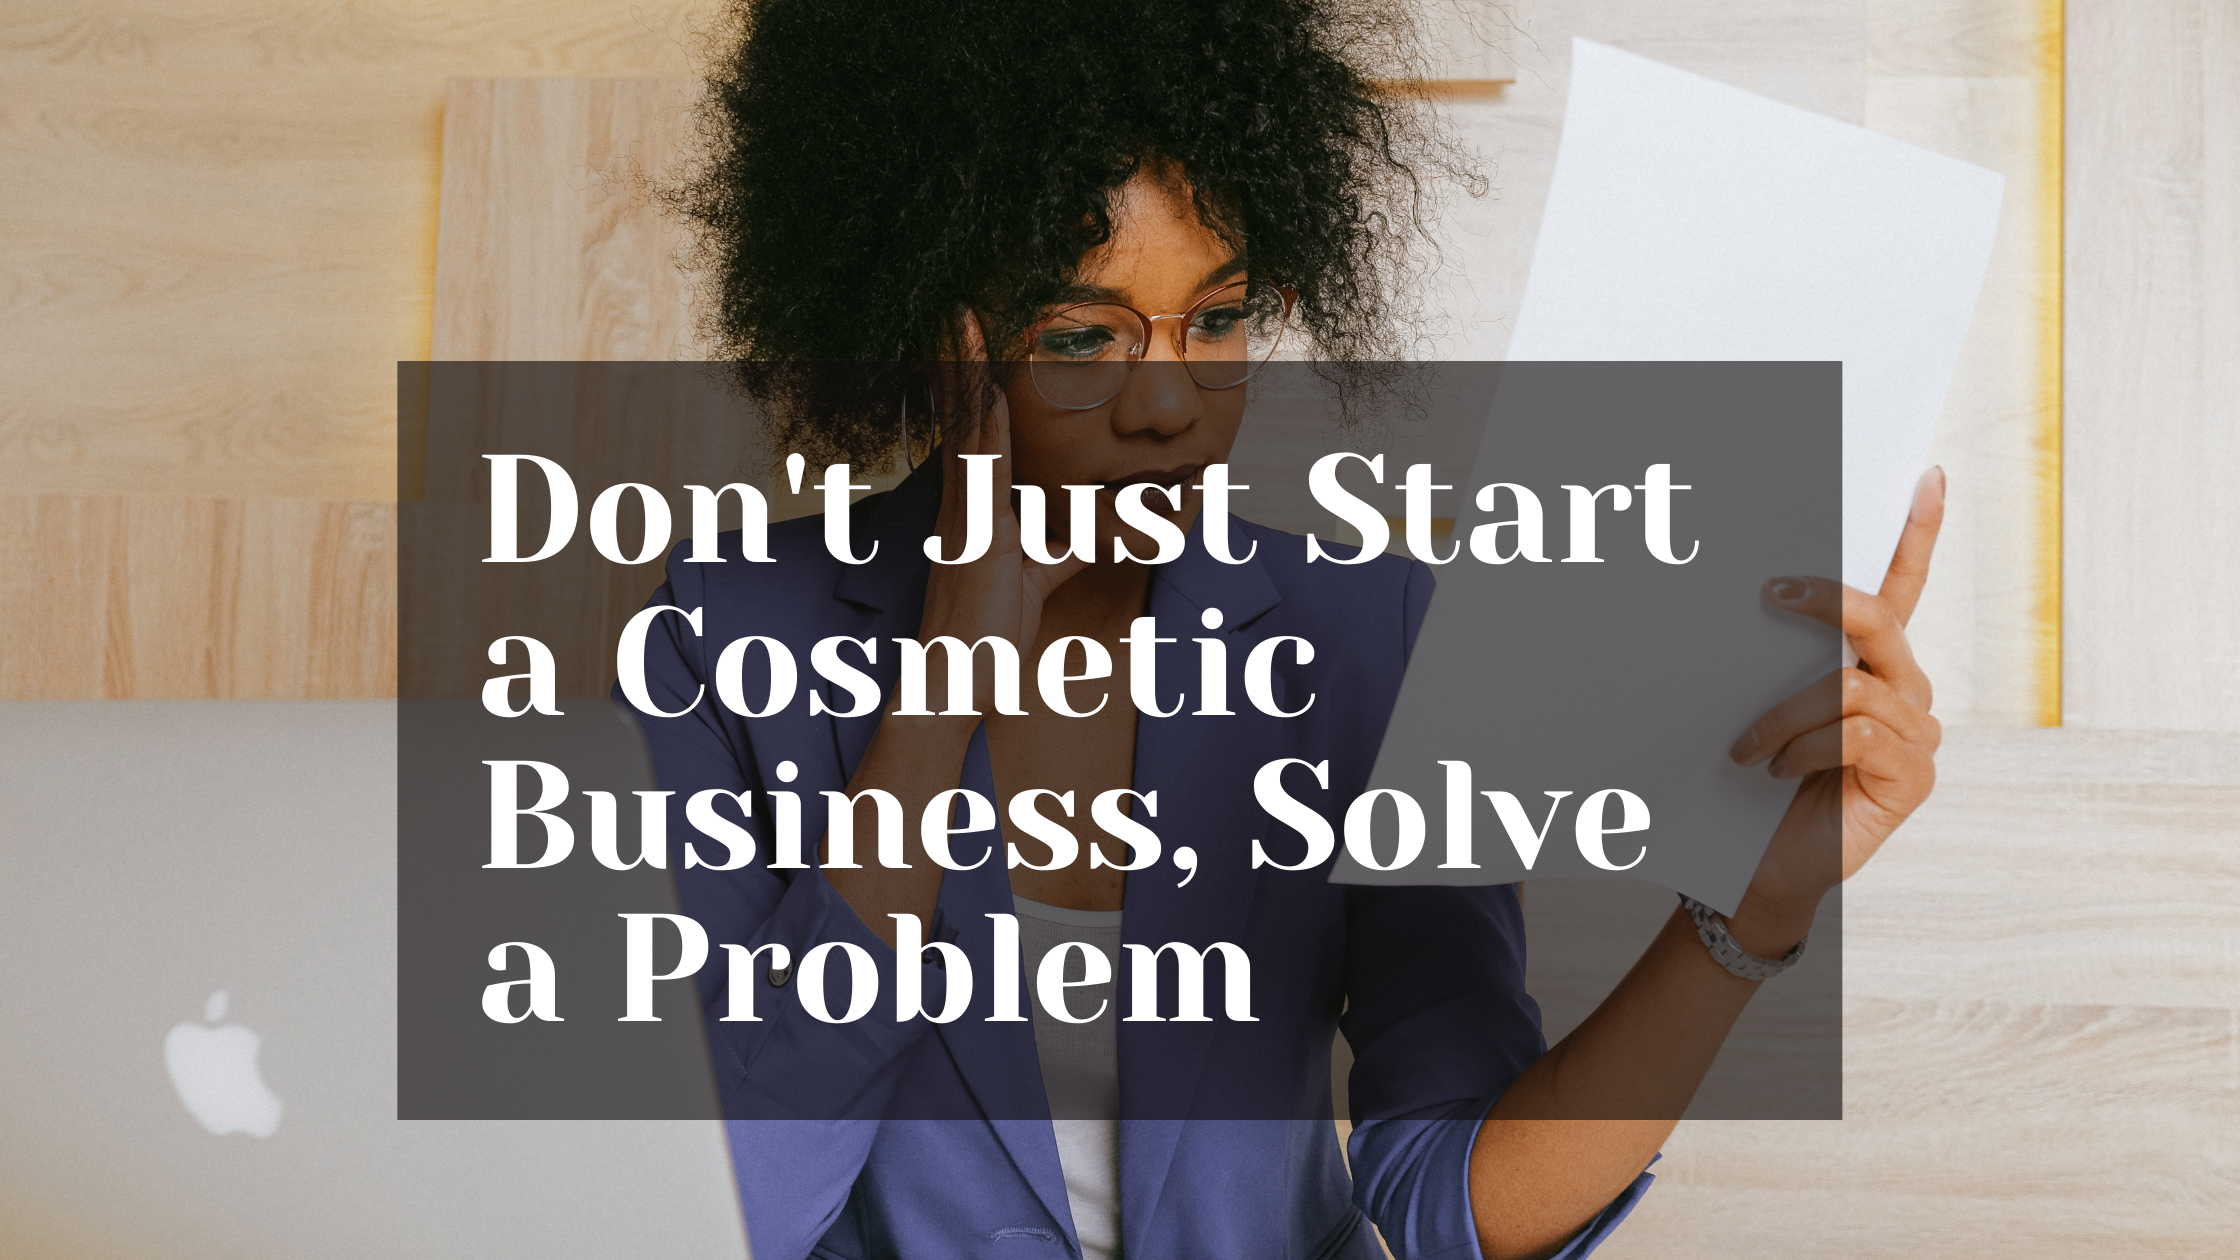 Don’t Just Start a Cosmetic Business, Solve a Problem